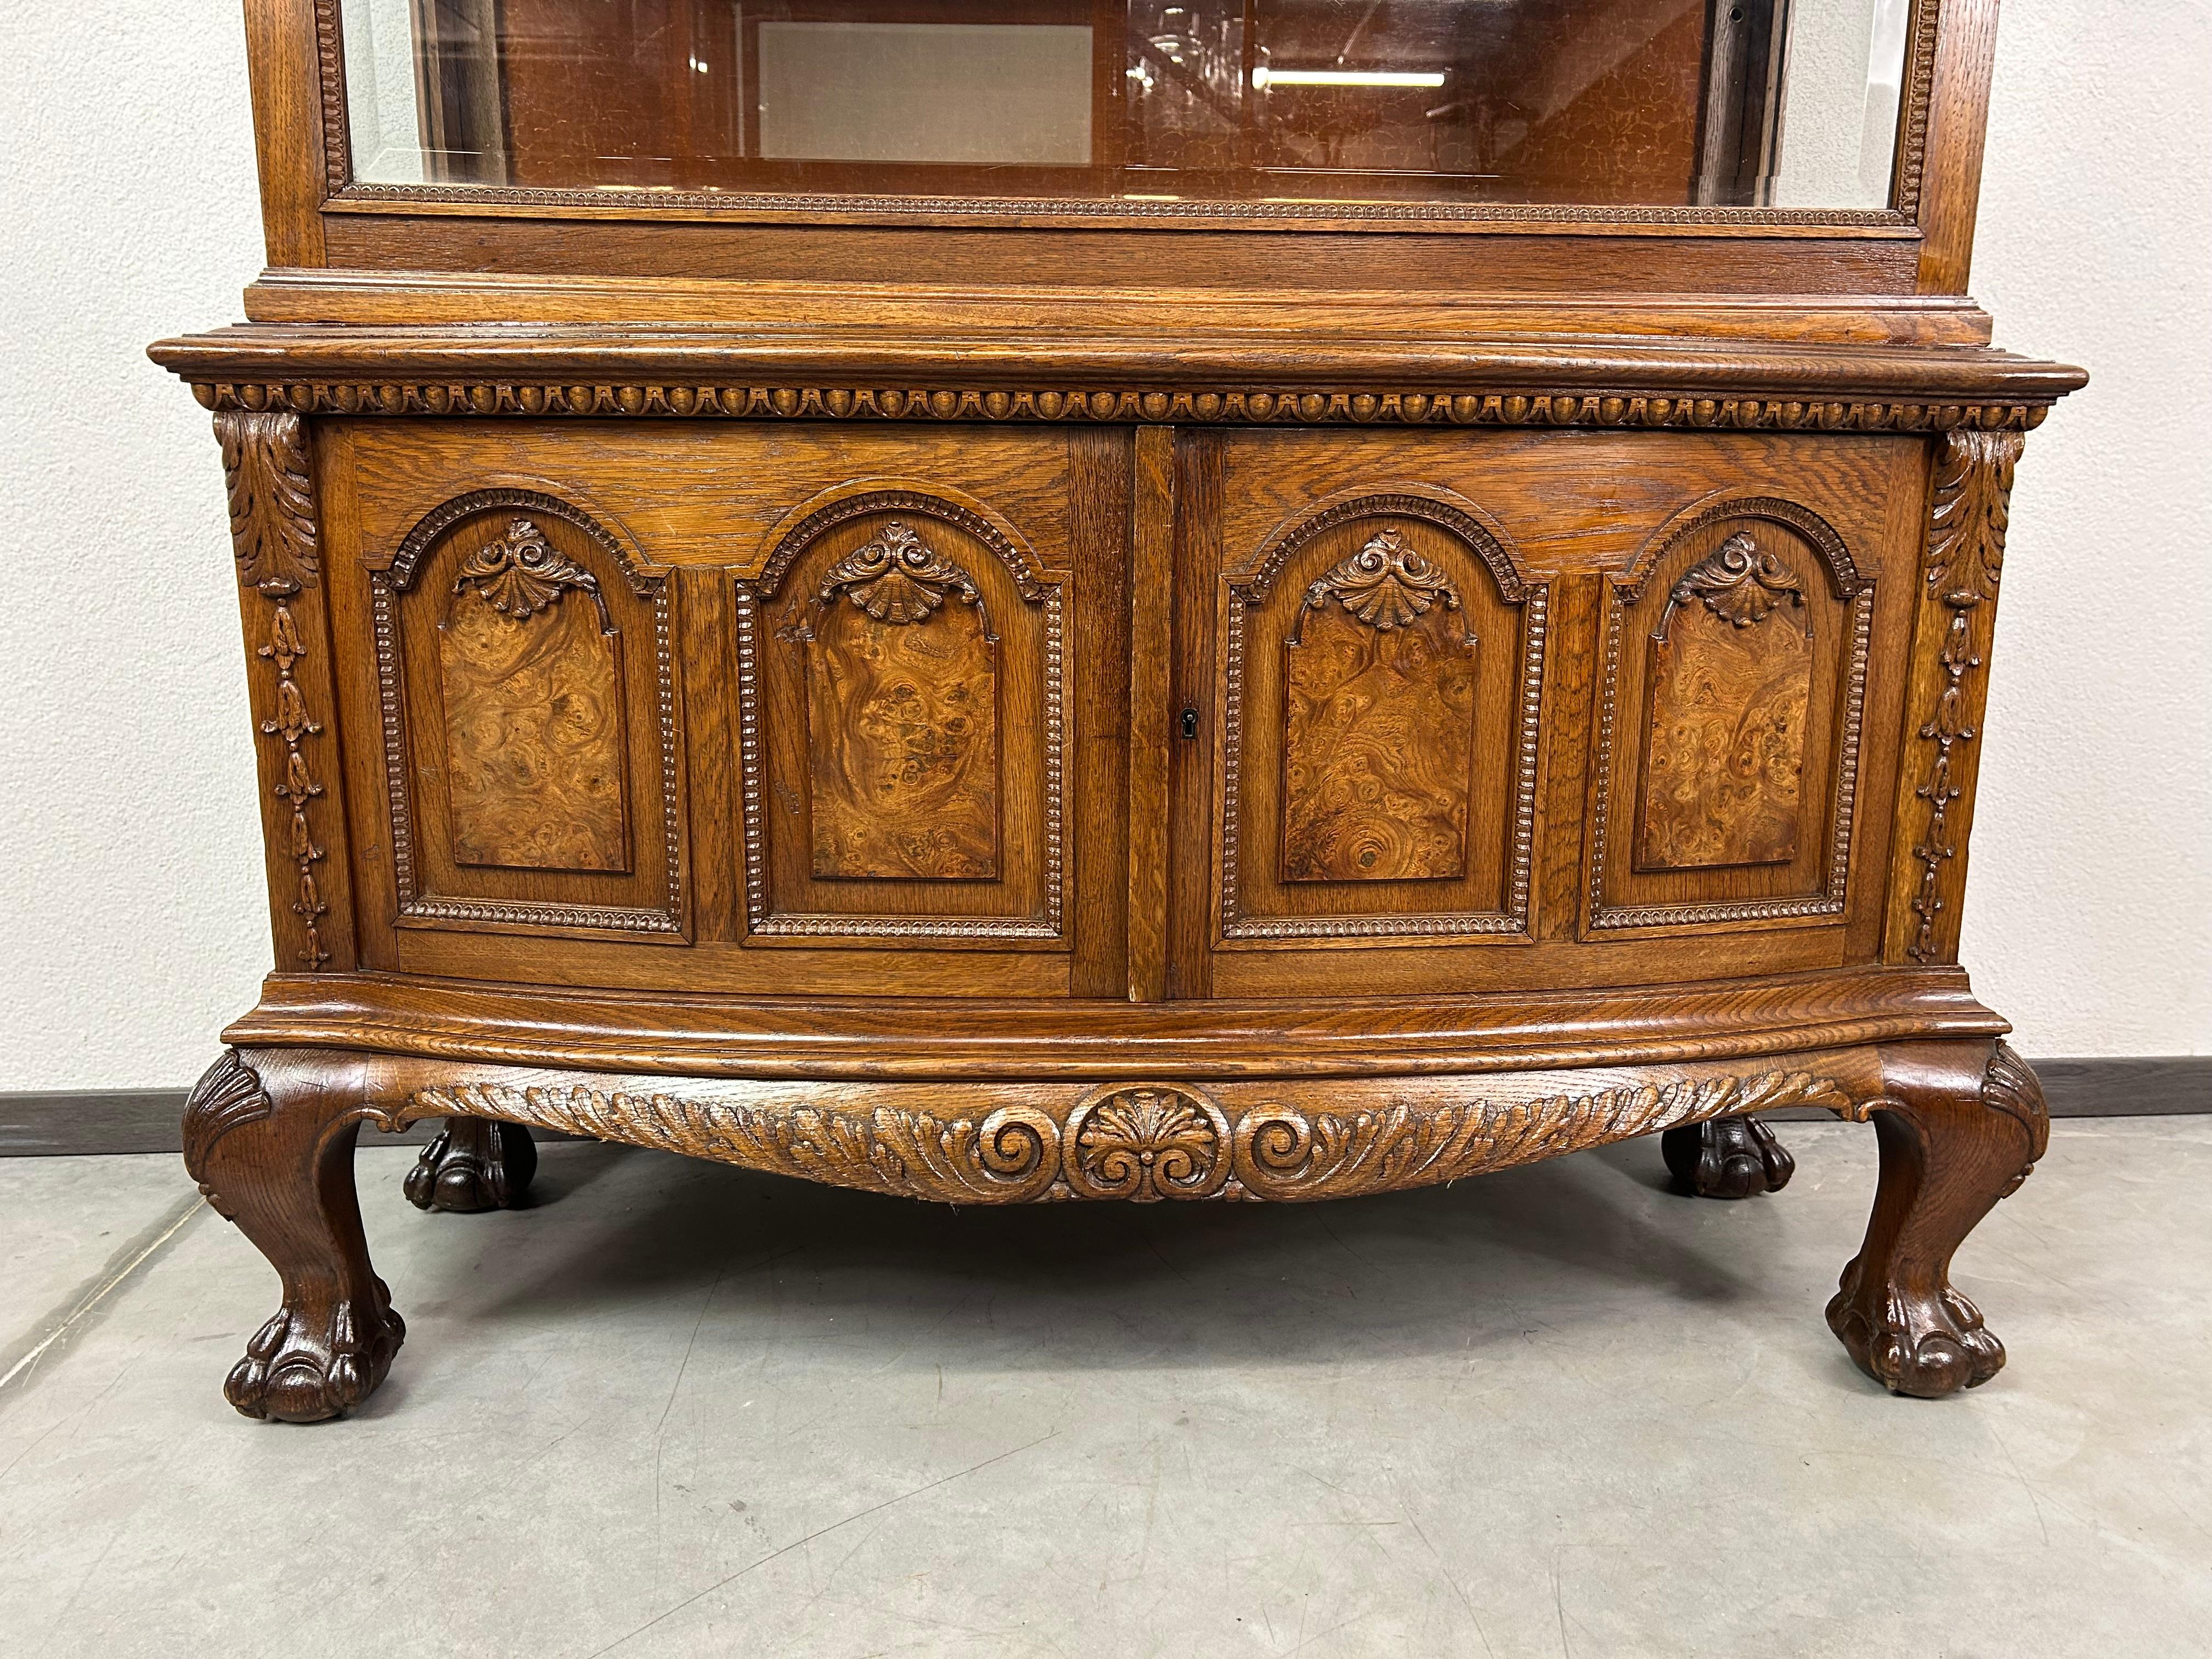 Large showcase by Lingel in excellent original condition. One door lock is missing.

The first Hungarian wooden furniture factory was founded in 1864 by Karóly Lingel under the name Lingel Karóly and Sons. Initially they produced wooden goods,